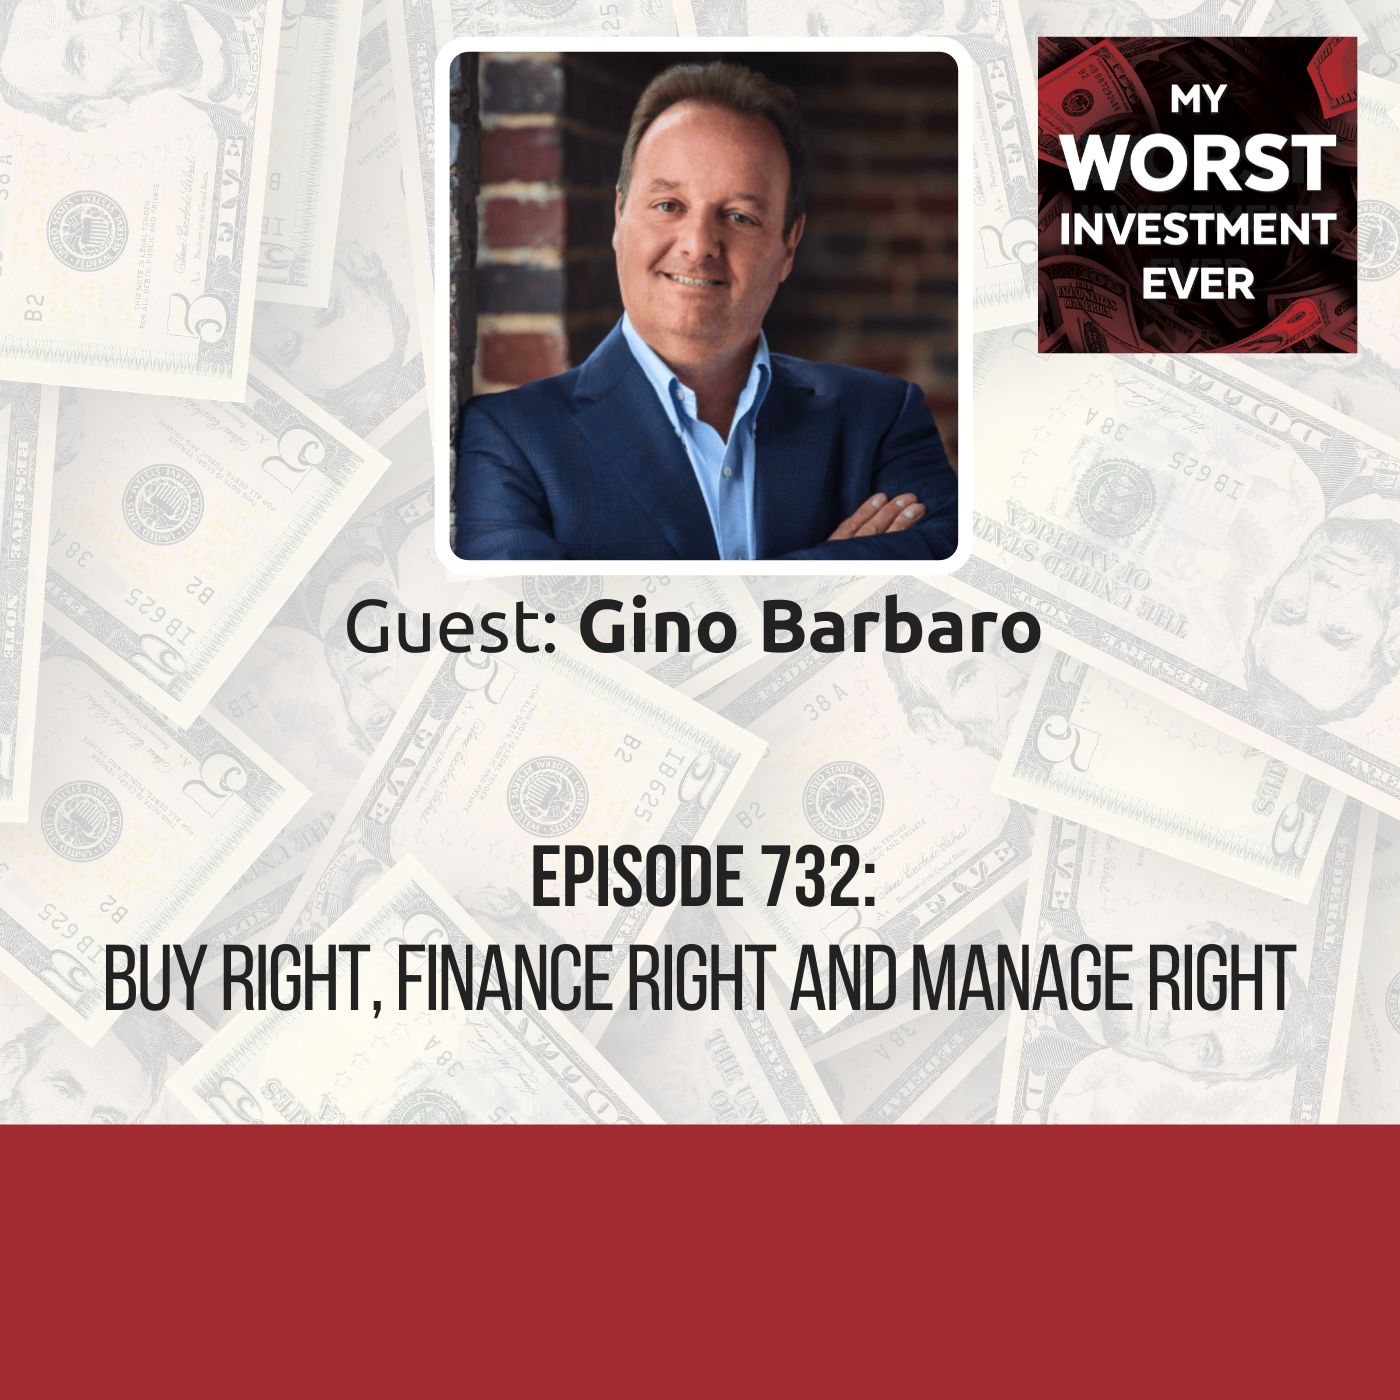 Gino Barbaro – Buy Right, Finance Right and Manage Right